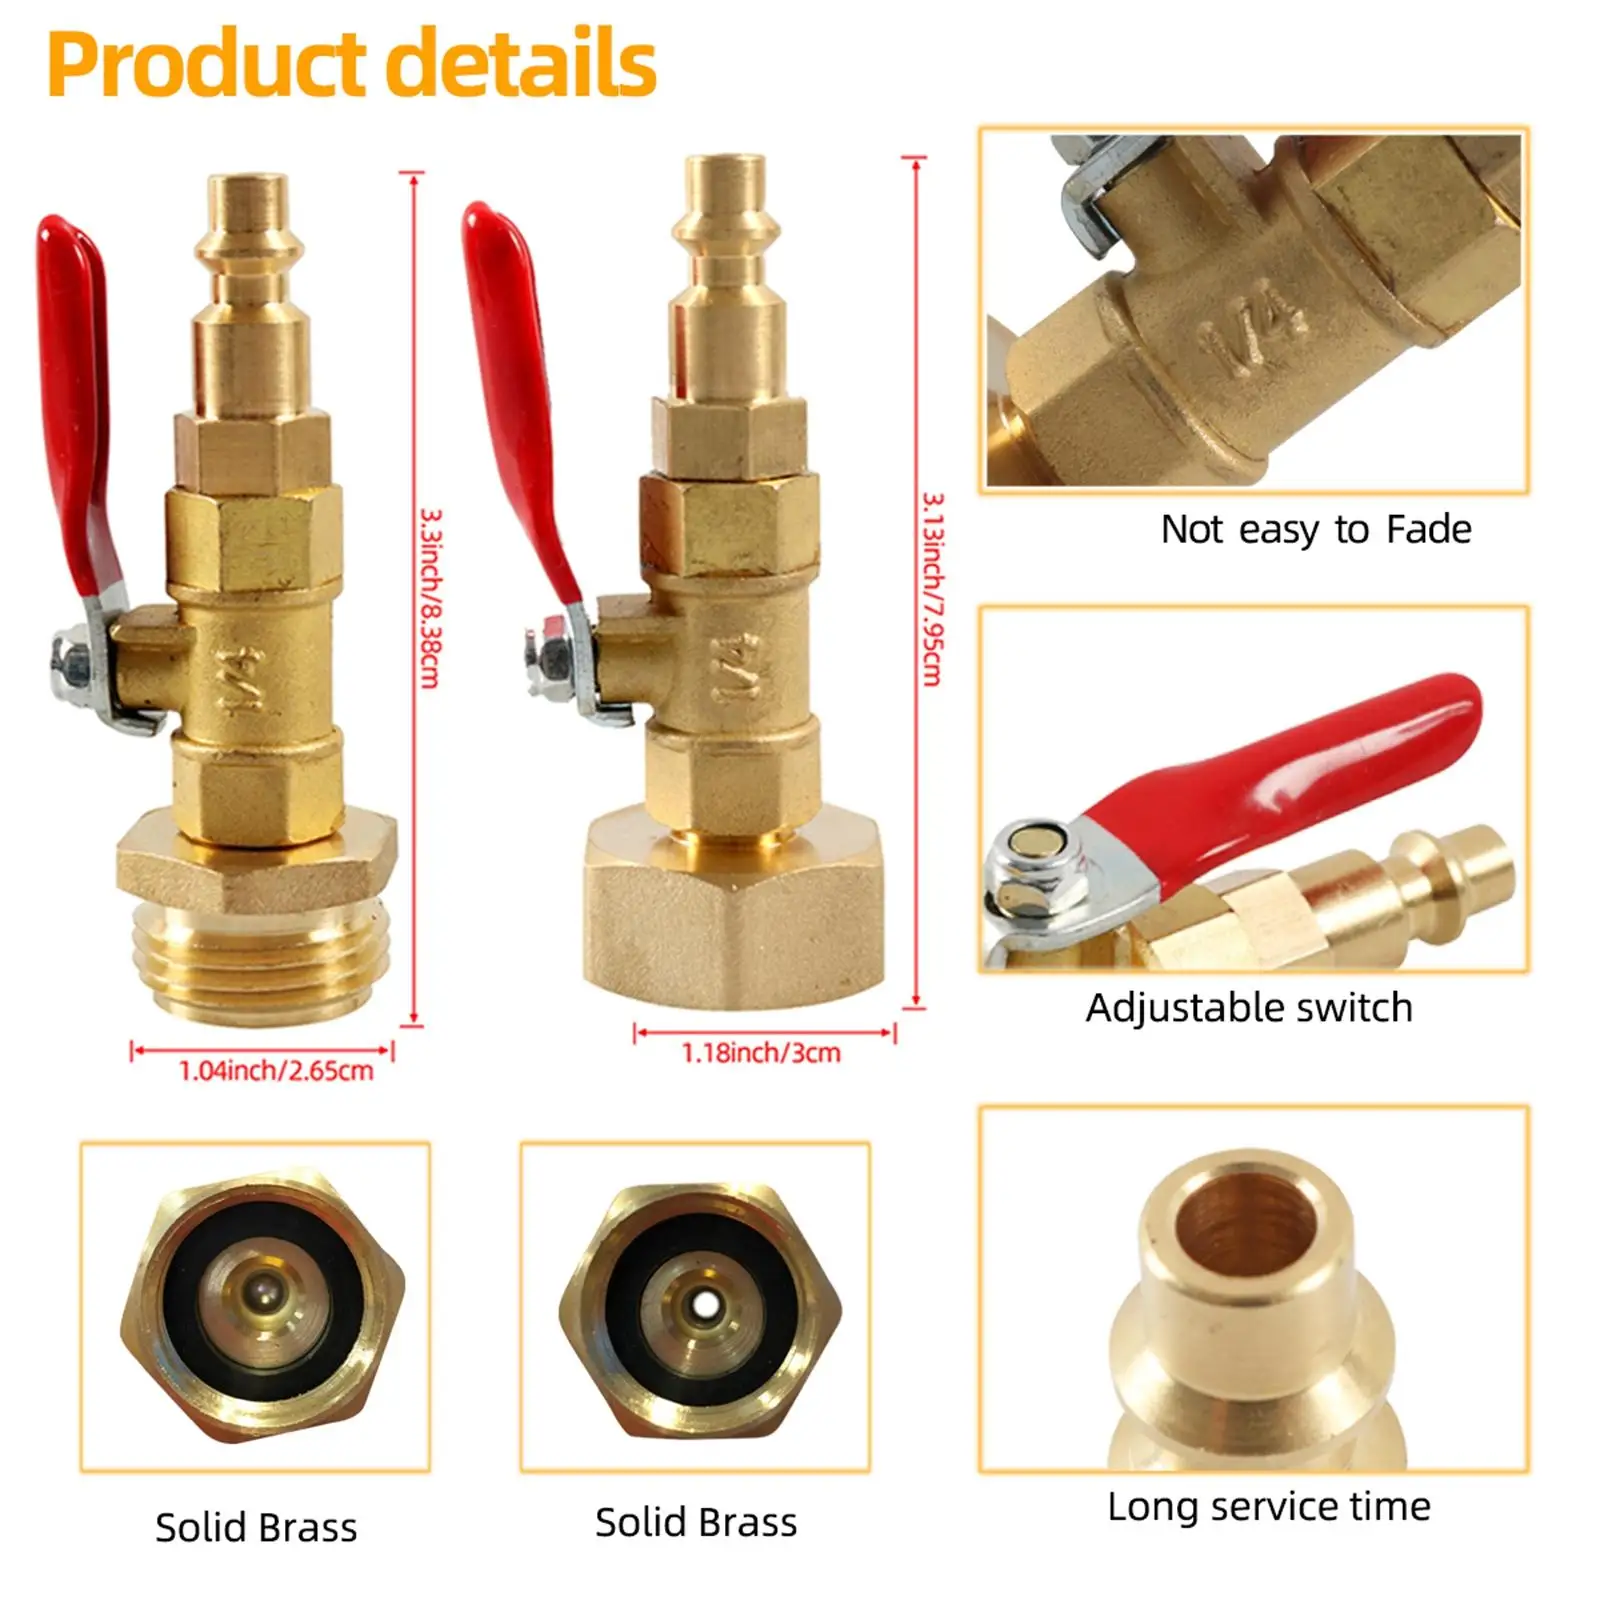 Winterize Blowout Adapter, with Ball Valve 0.75